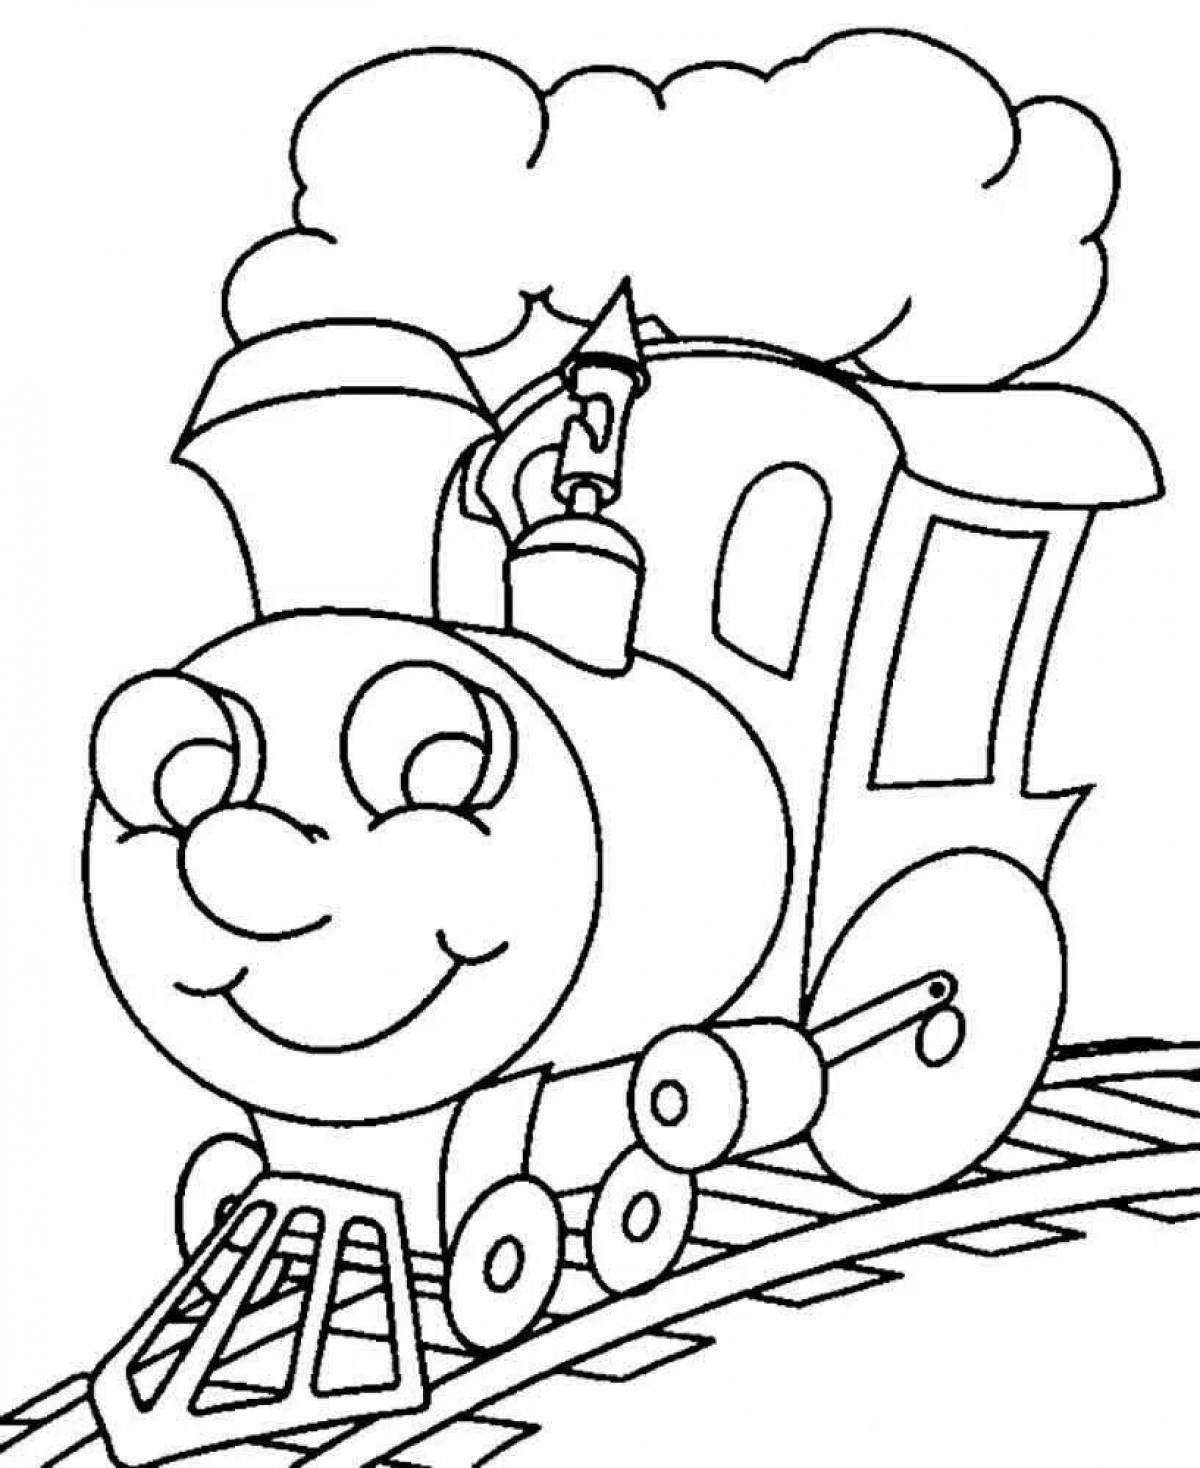 Intriguing locomotive coloring book for kids